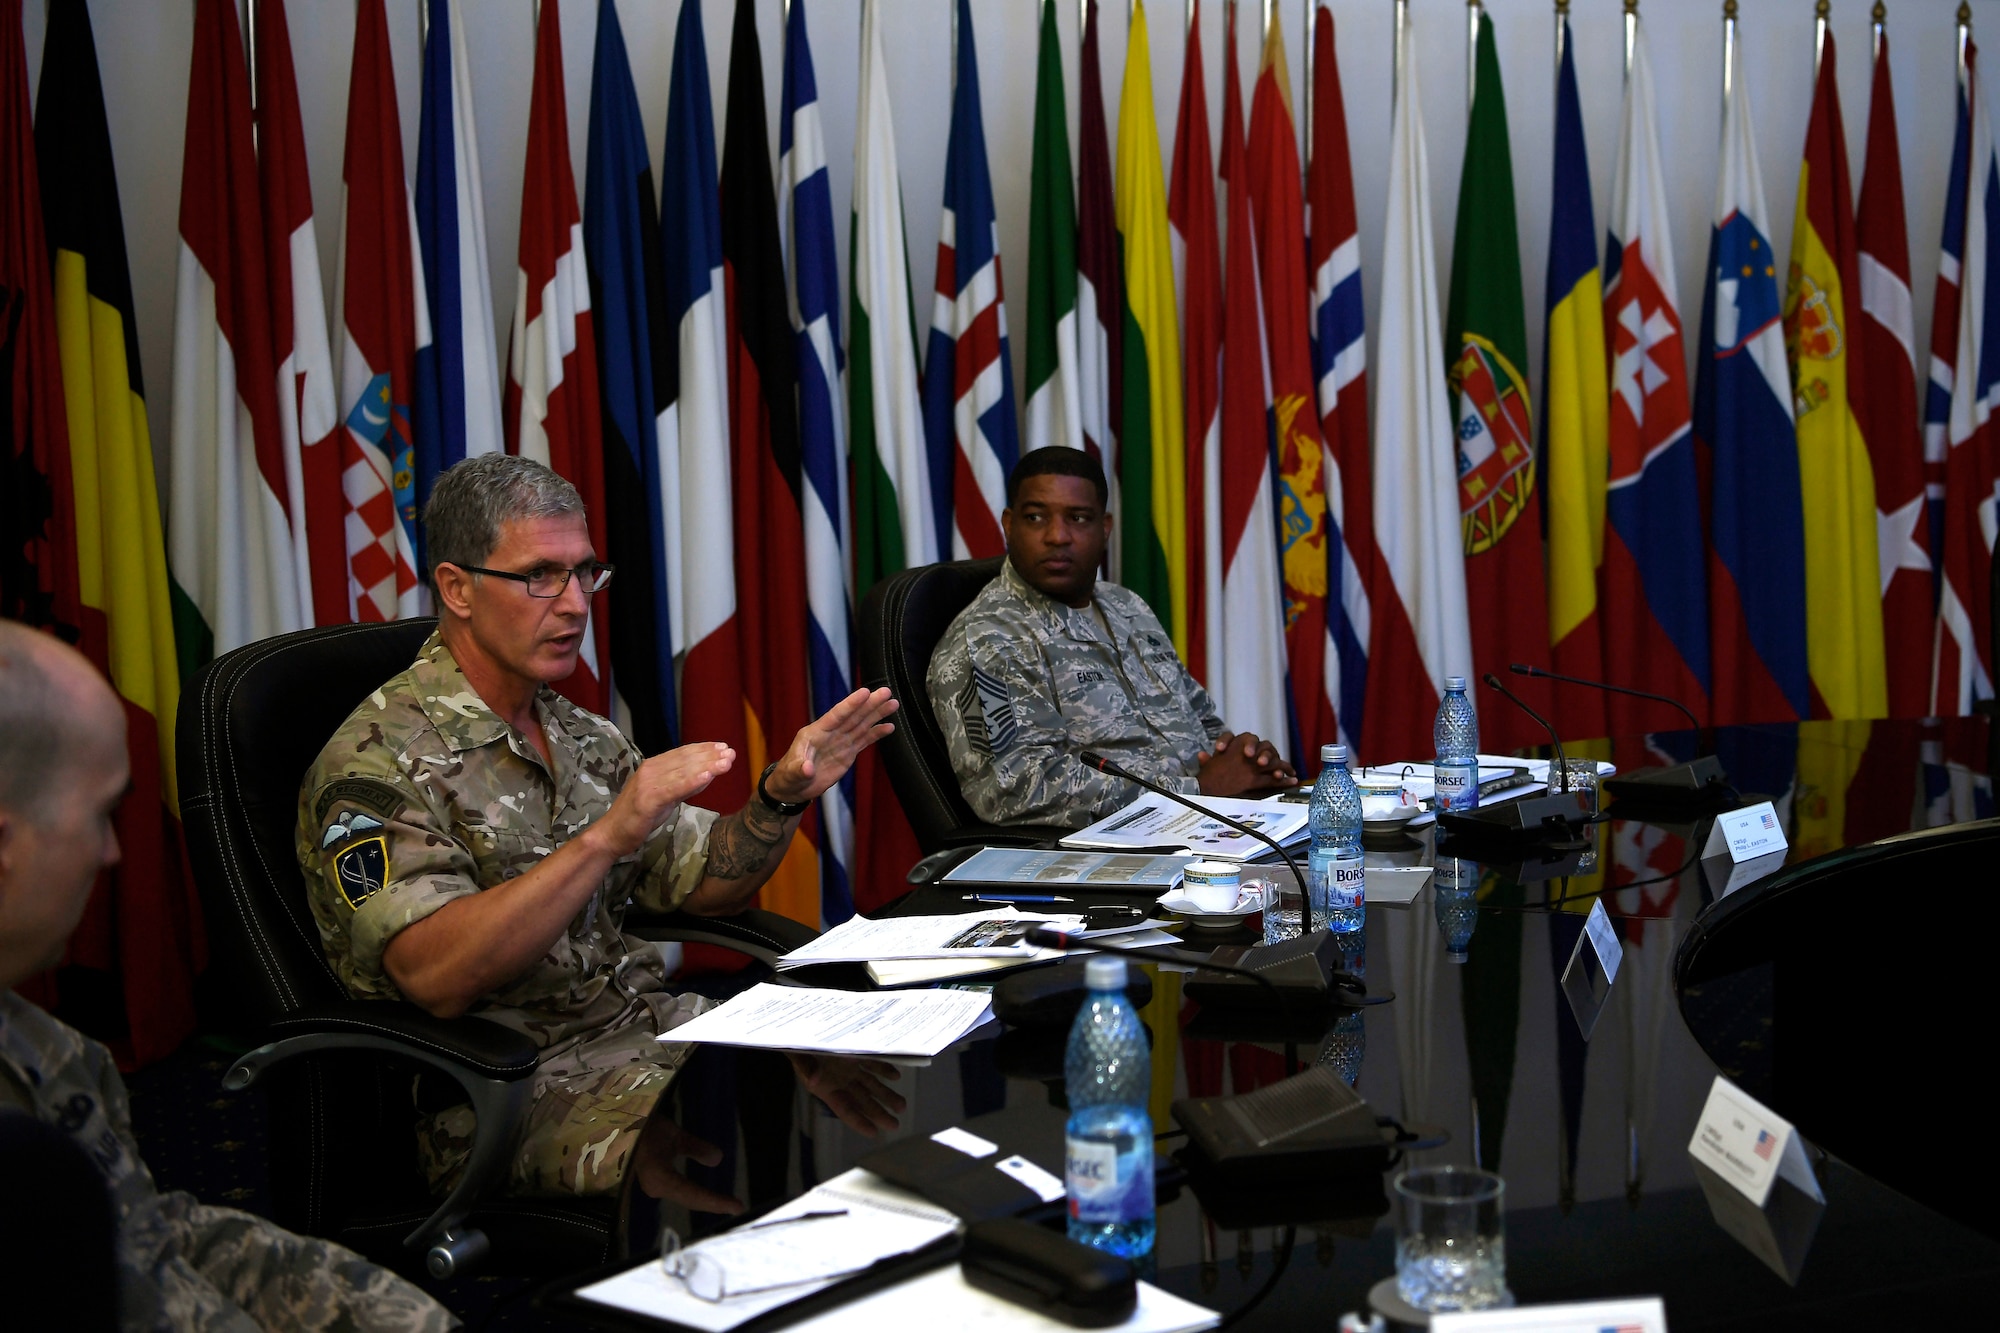 Royal Air Force Chief Warrant Officer Jake Alpert, Allied Air Command command senior enlisted leader and U.S. Air Force Chief Master Sgt. Phillip L. Easton, U.S. Air Forces in Europe and Air Forces in Africa command chief, converse during the Romanian air force’s International SEL Visit at Bucharest, Romania, July 10, 2018.